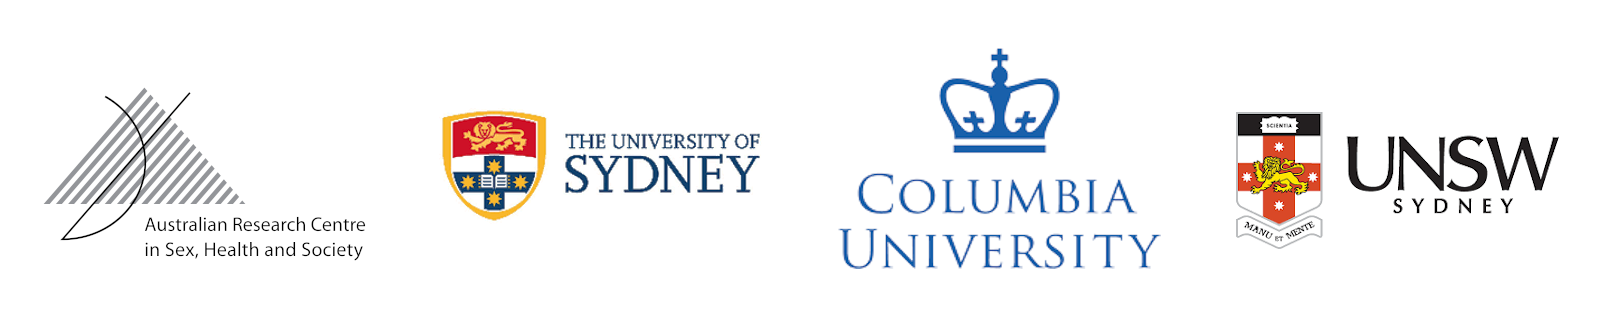 The logos of the Australian Research Centre in Sex, Health and Society, the University of Sydney, Columbia University and UNSW Sydney